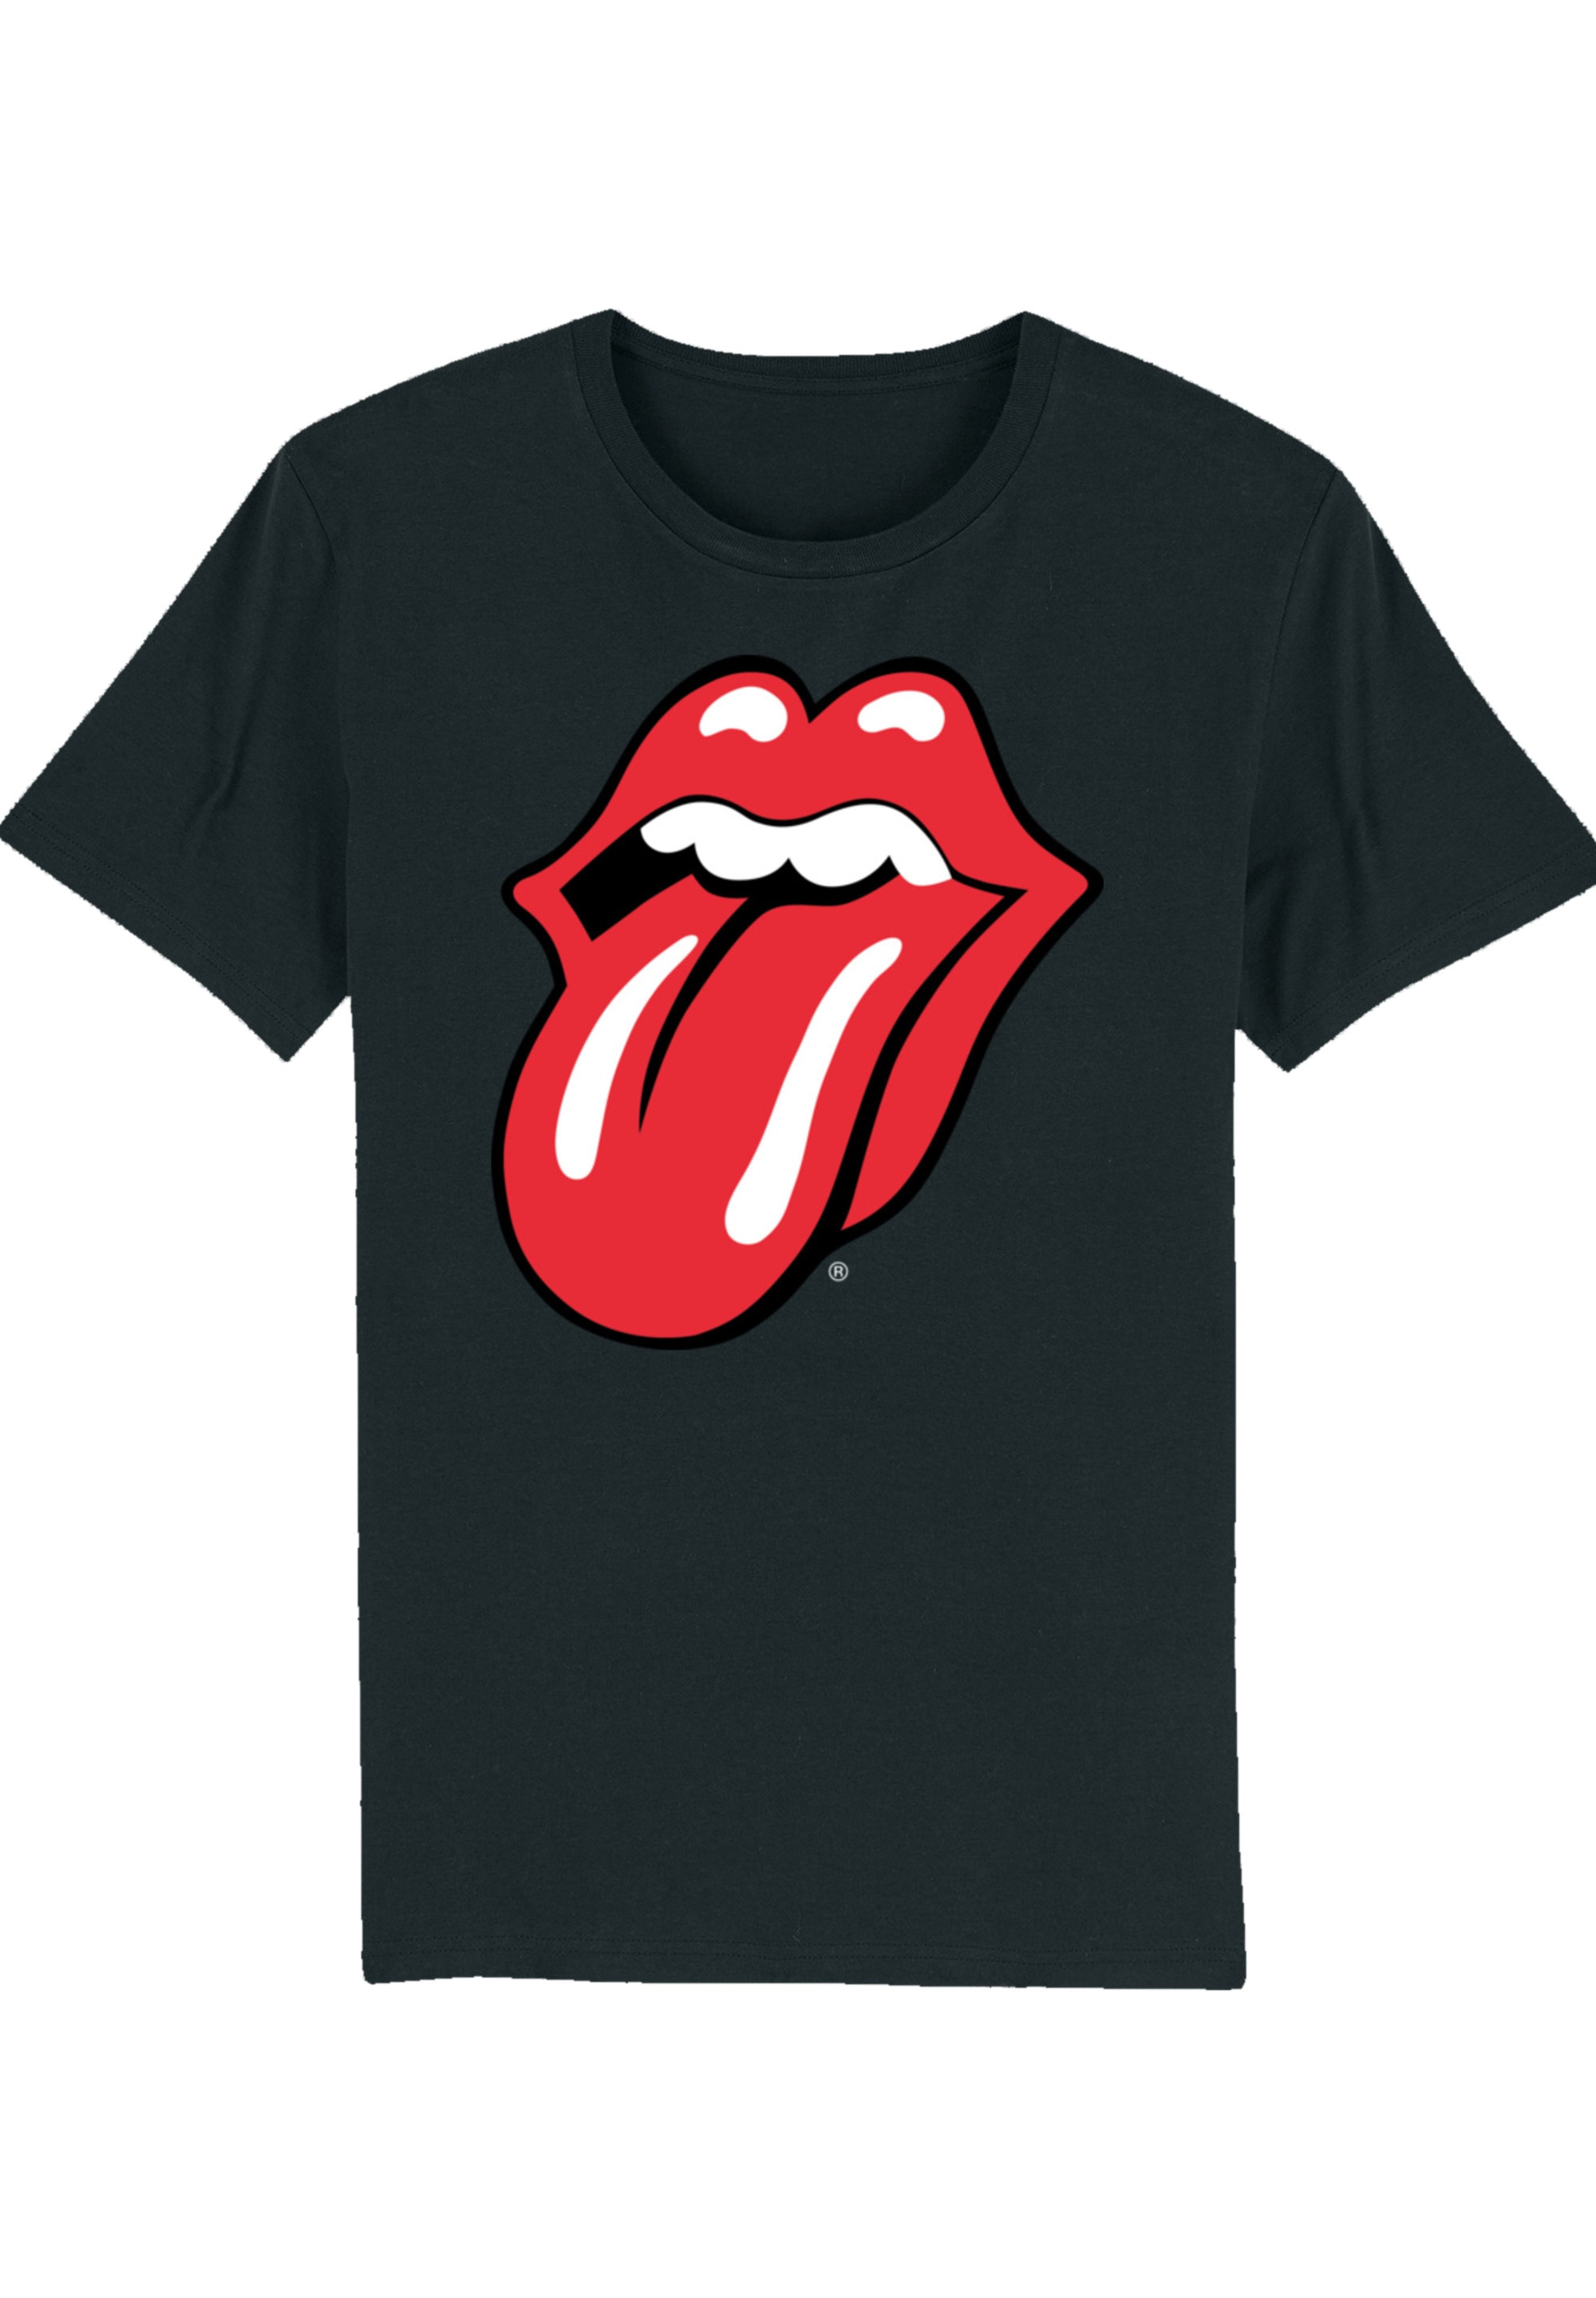 Stones | »The Print kaufen Rolling Rote F4NT4STIC Zunge«, T-Shirt online BAUR